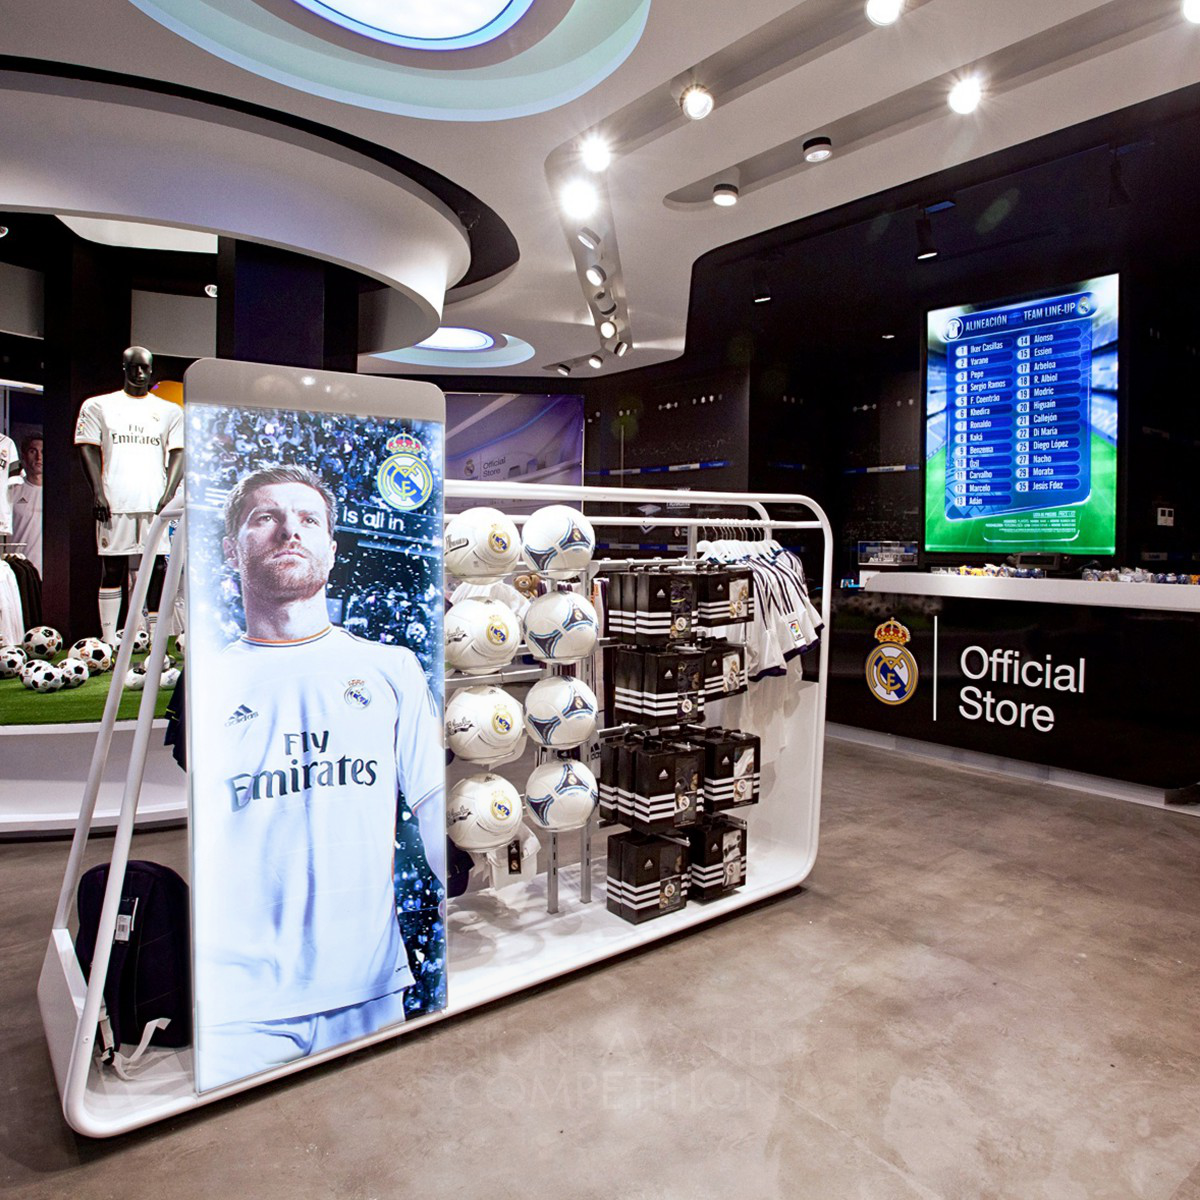 Real Madrid Official Store Official Store, Retail by sanzpont [arquitectura]